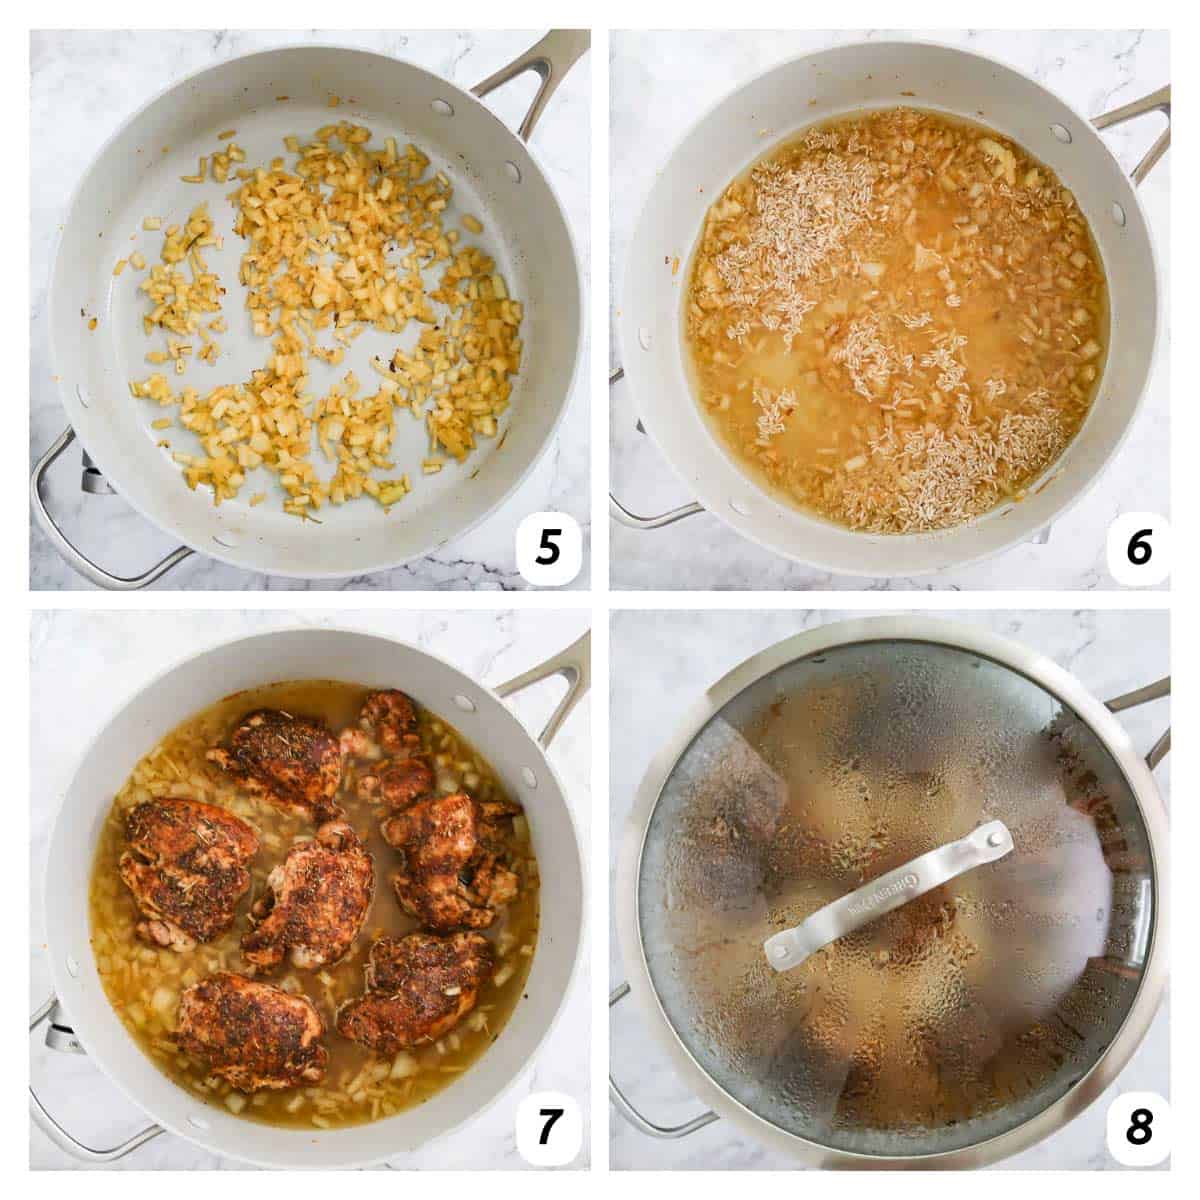 Four panel grid of process shots 5-8 - sautéing onions, adding broth, rice and chicken, and cooking all in the same pot.